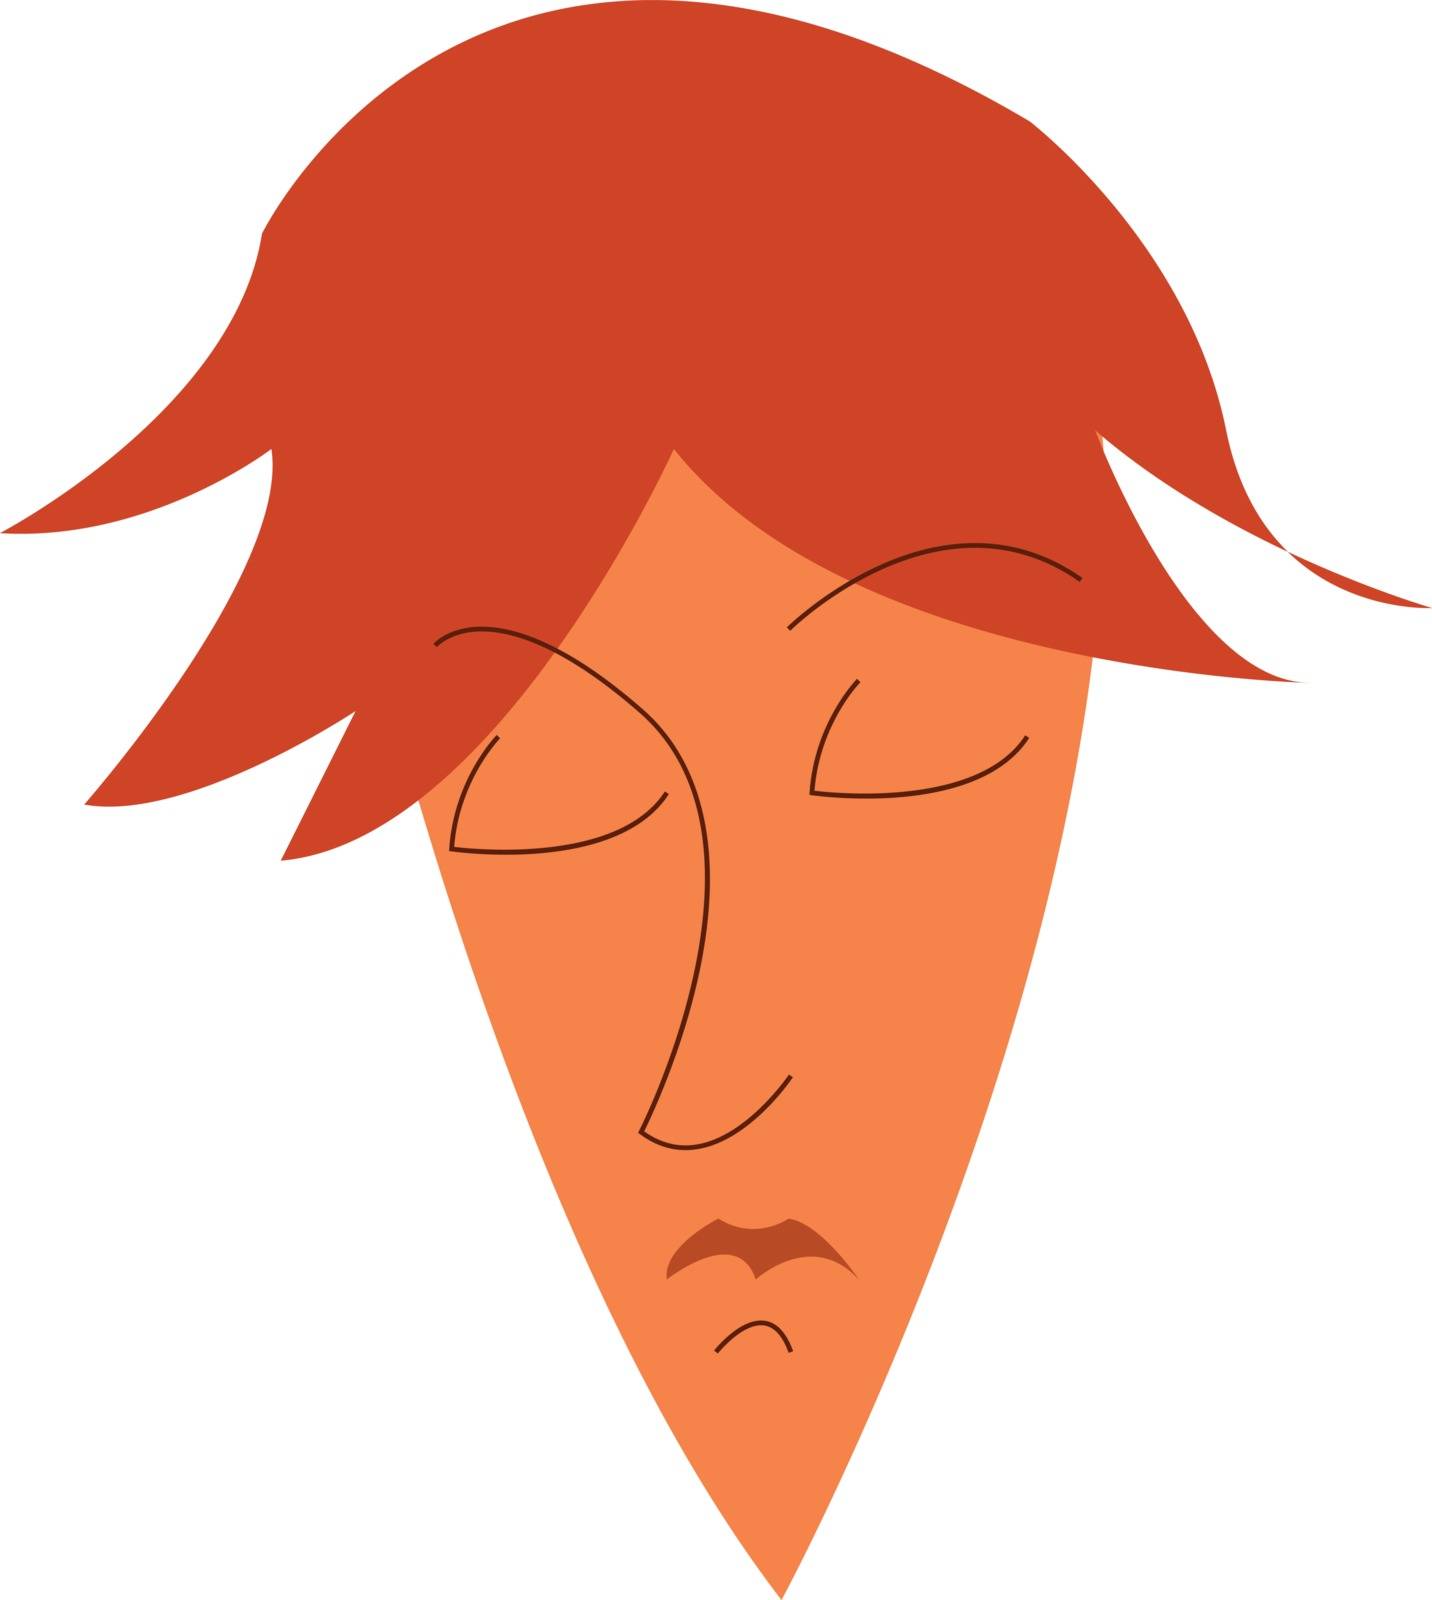 It is an image of a man with brown hair pointed chin whose eyes are closed vector color drawing or illustration